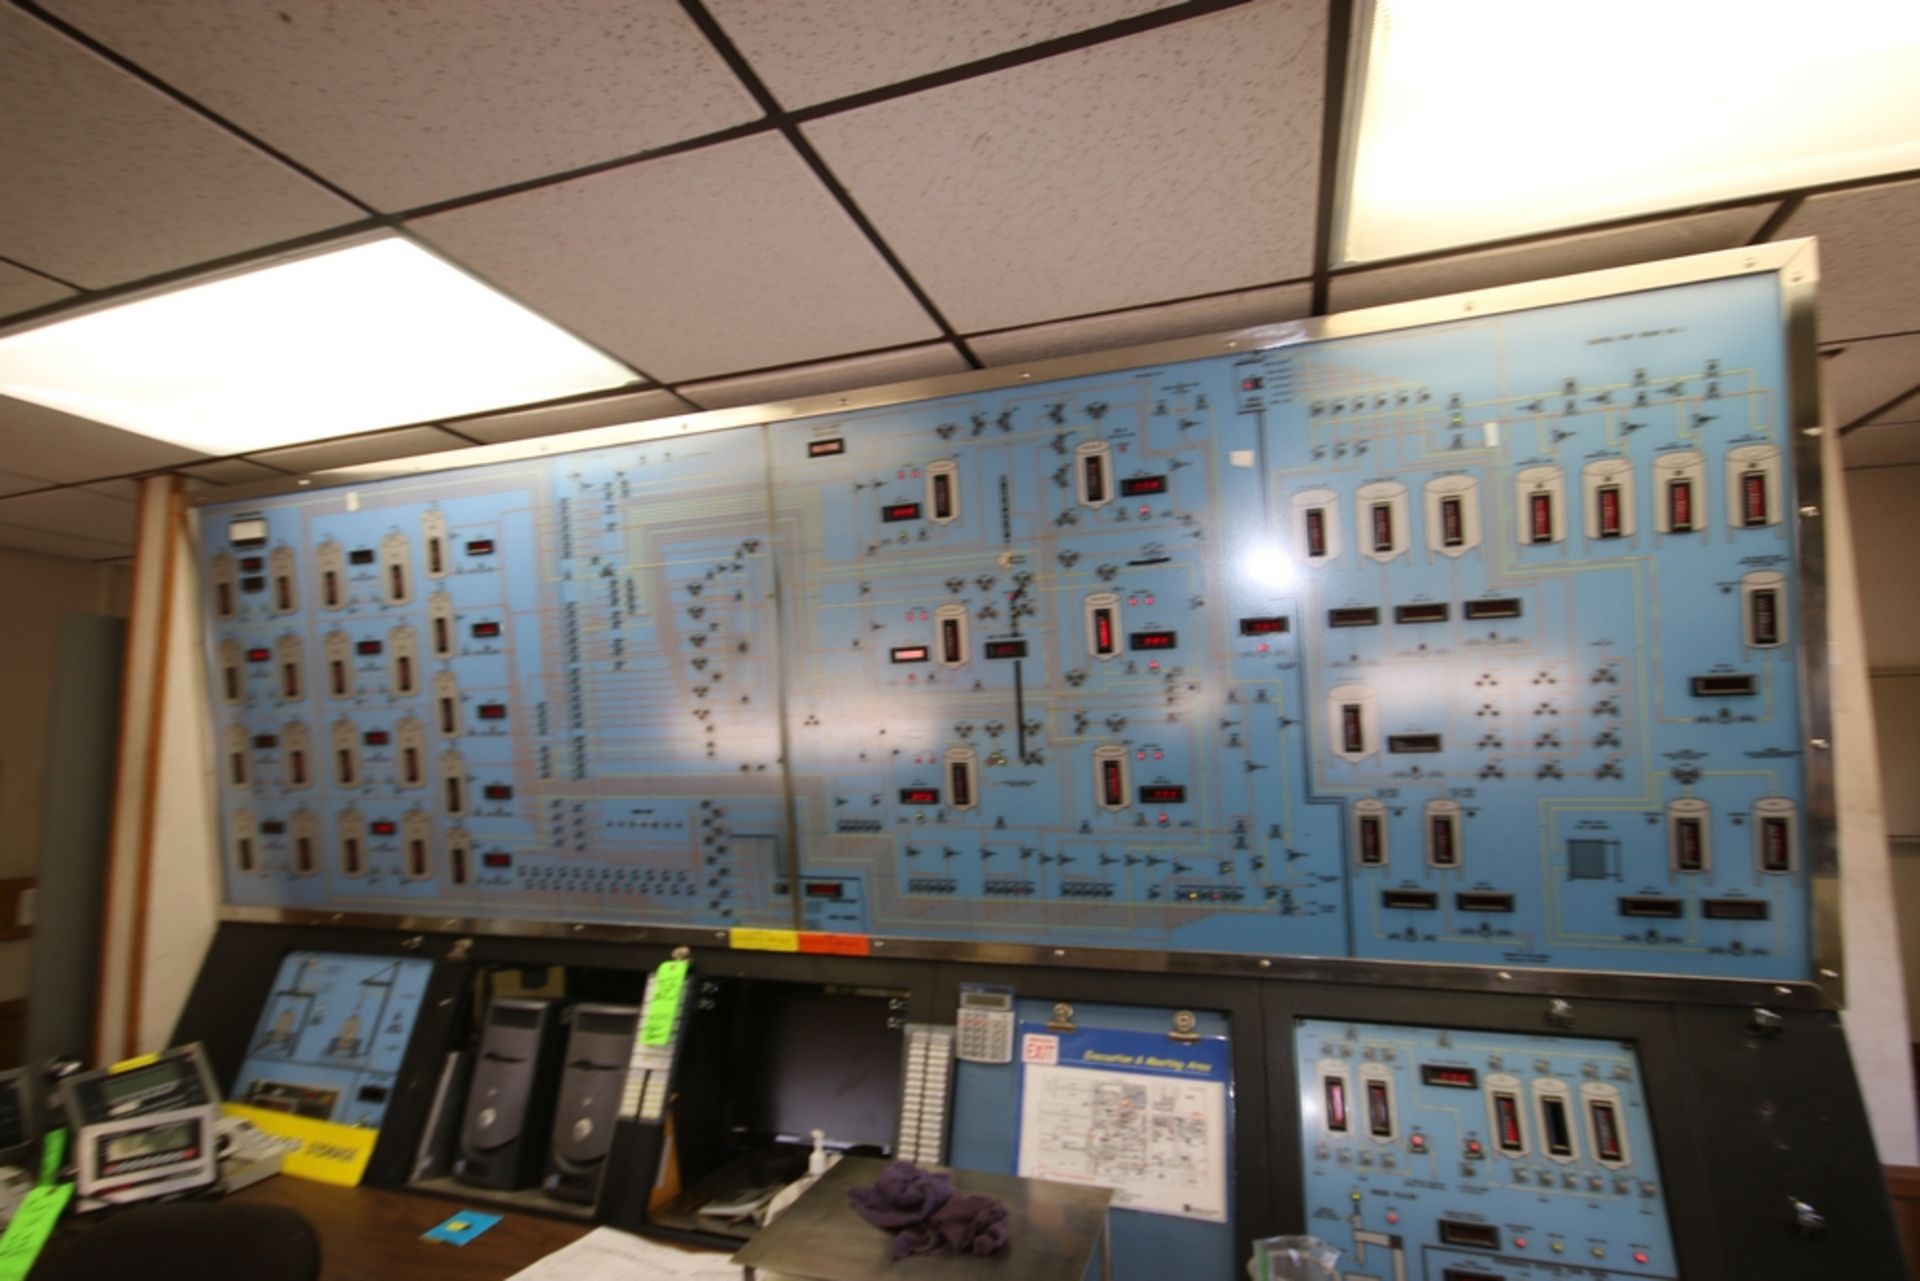 Control Room Display Board, Includes Tank Level Diagram & Tank Receiving Diagram, Wall Mounted in